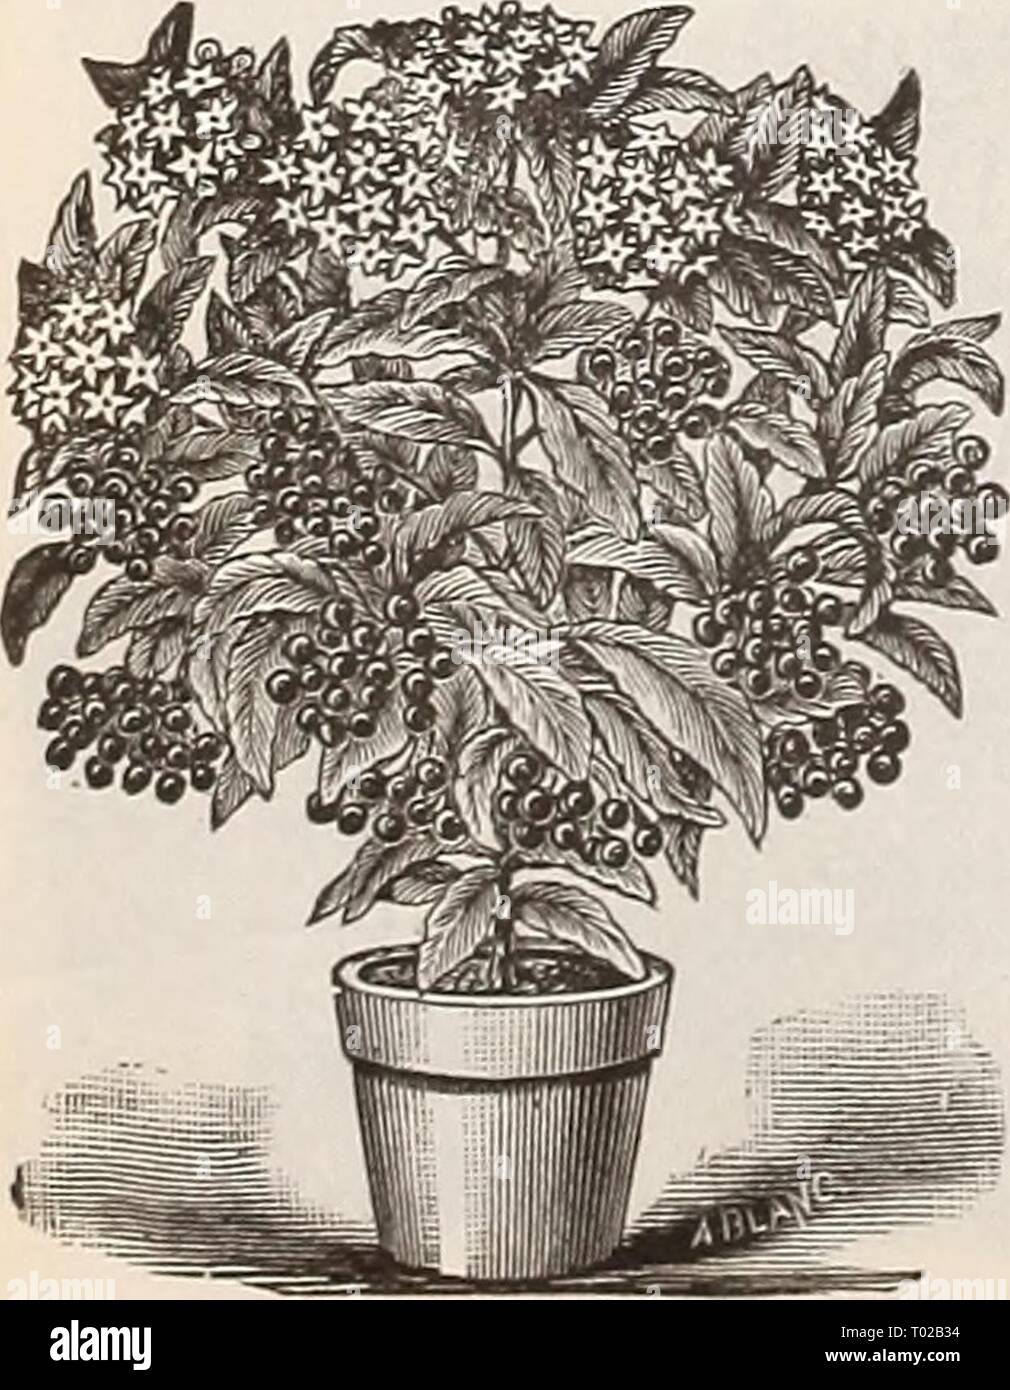 Dreer's garden calendar : 1896 . dreersgardencale1896henr Year: 1896  Araucakia Excelsa. ASPIDISTRA LTJRIDA VARIEGATA. A beautiful plant with large, lance-shaped leaves, finely variegated with clear, cream-colored stripes. An elegant window or conservatory plant of the easiest culture. 50 cts. to $1.00. Aspidistra Luricla. A green-leaved variety of the above, of strong growth ; will succeed in any po- sition ; an excellent hall or corridor plant. 50 cts. to §1.00 each. ARDISIA CRENULATA. A very ornamental green-house plant, with dark evergreen foliage, producing clusters of brilliant red berri Stock Photo